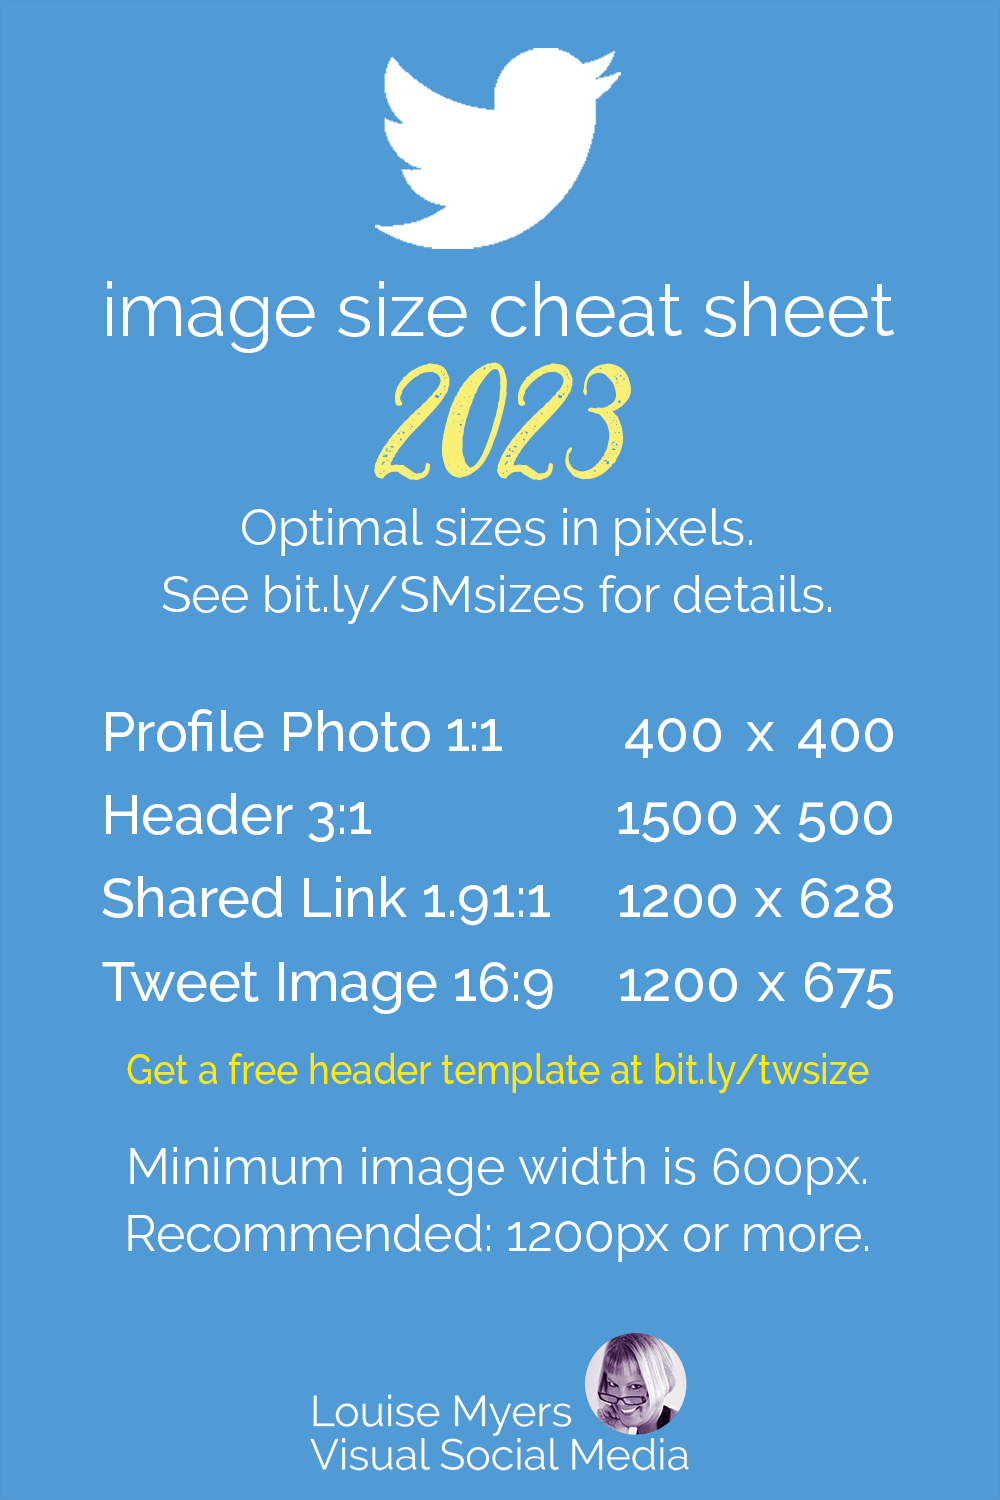 chart of twitter image sizes for 2023 on blue graphic.